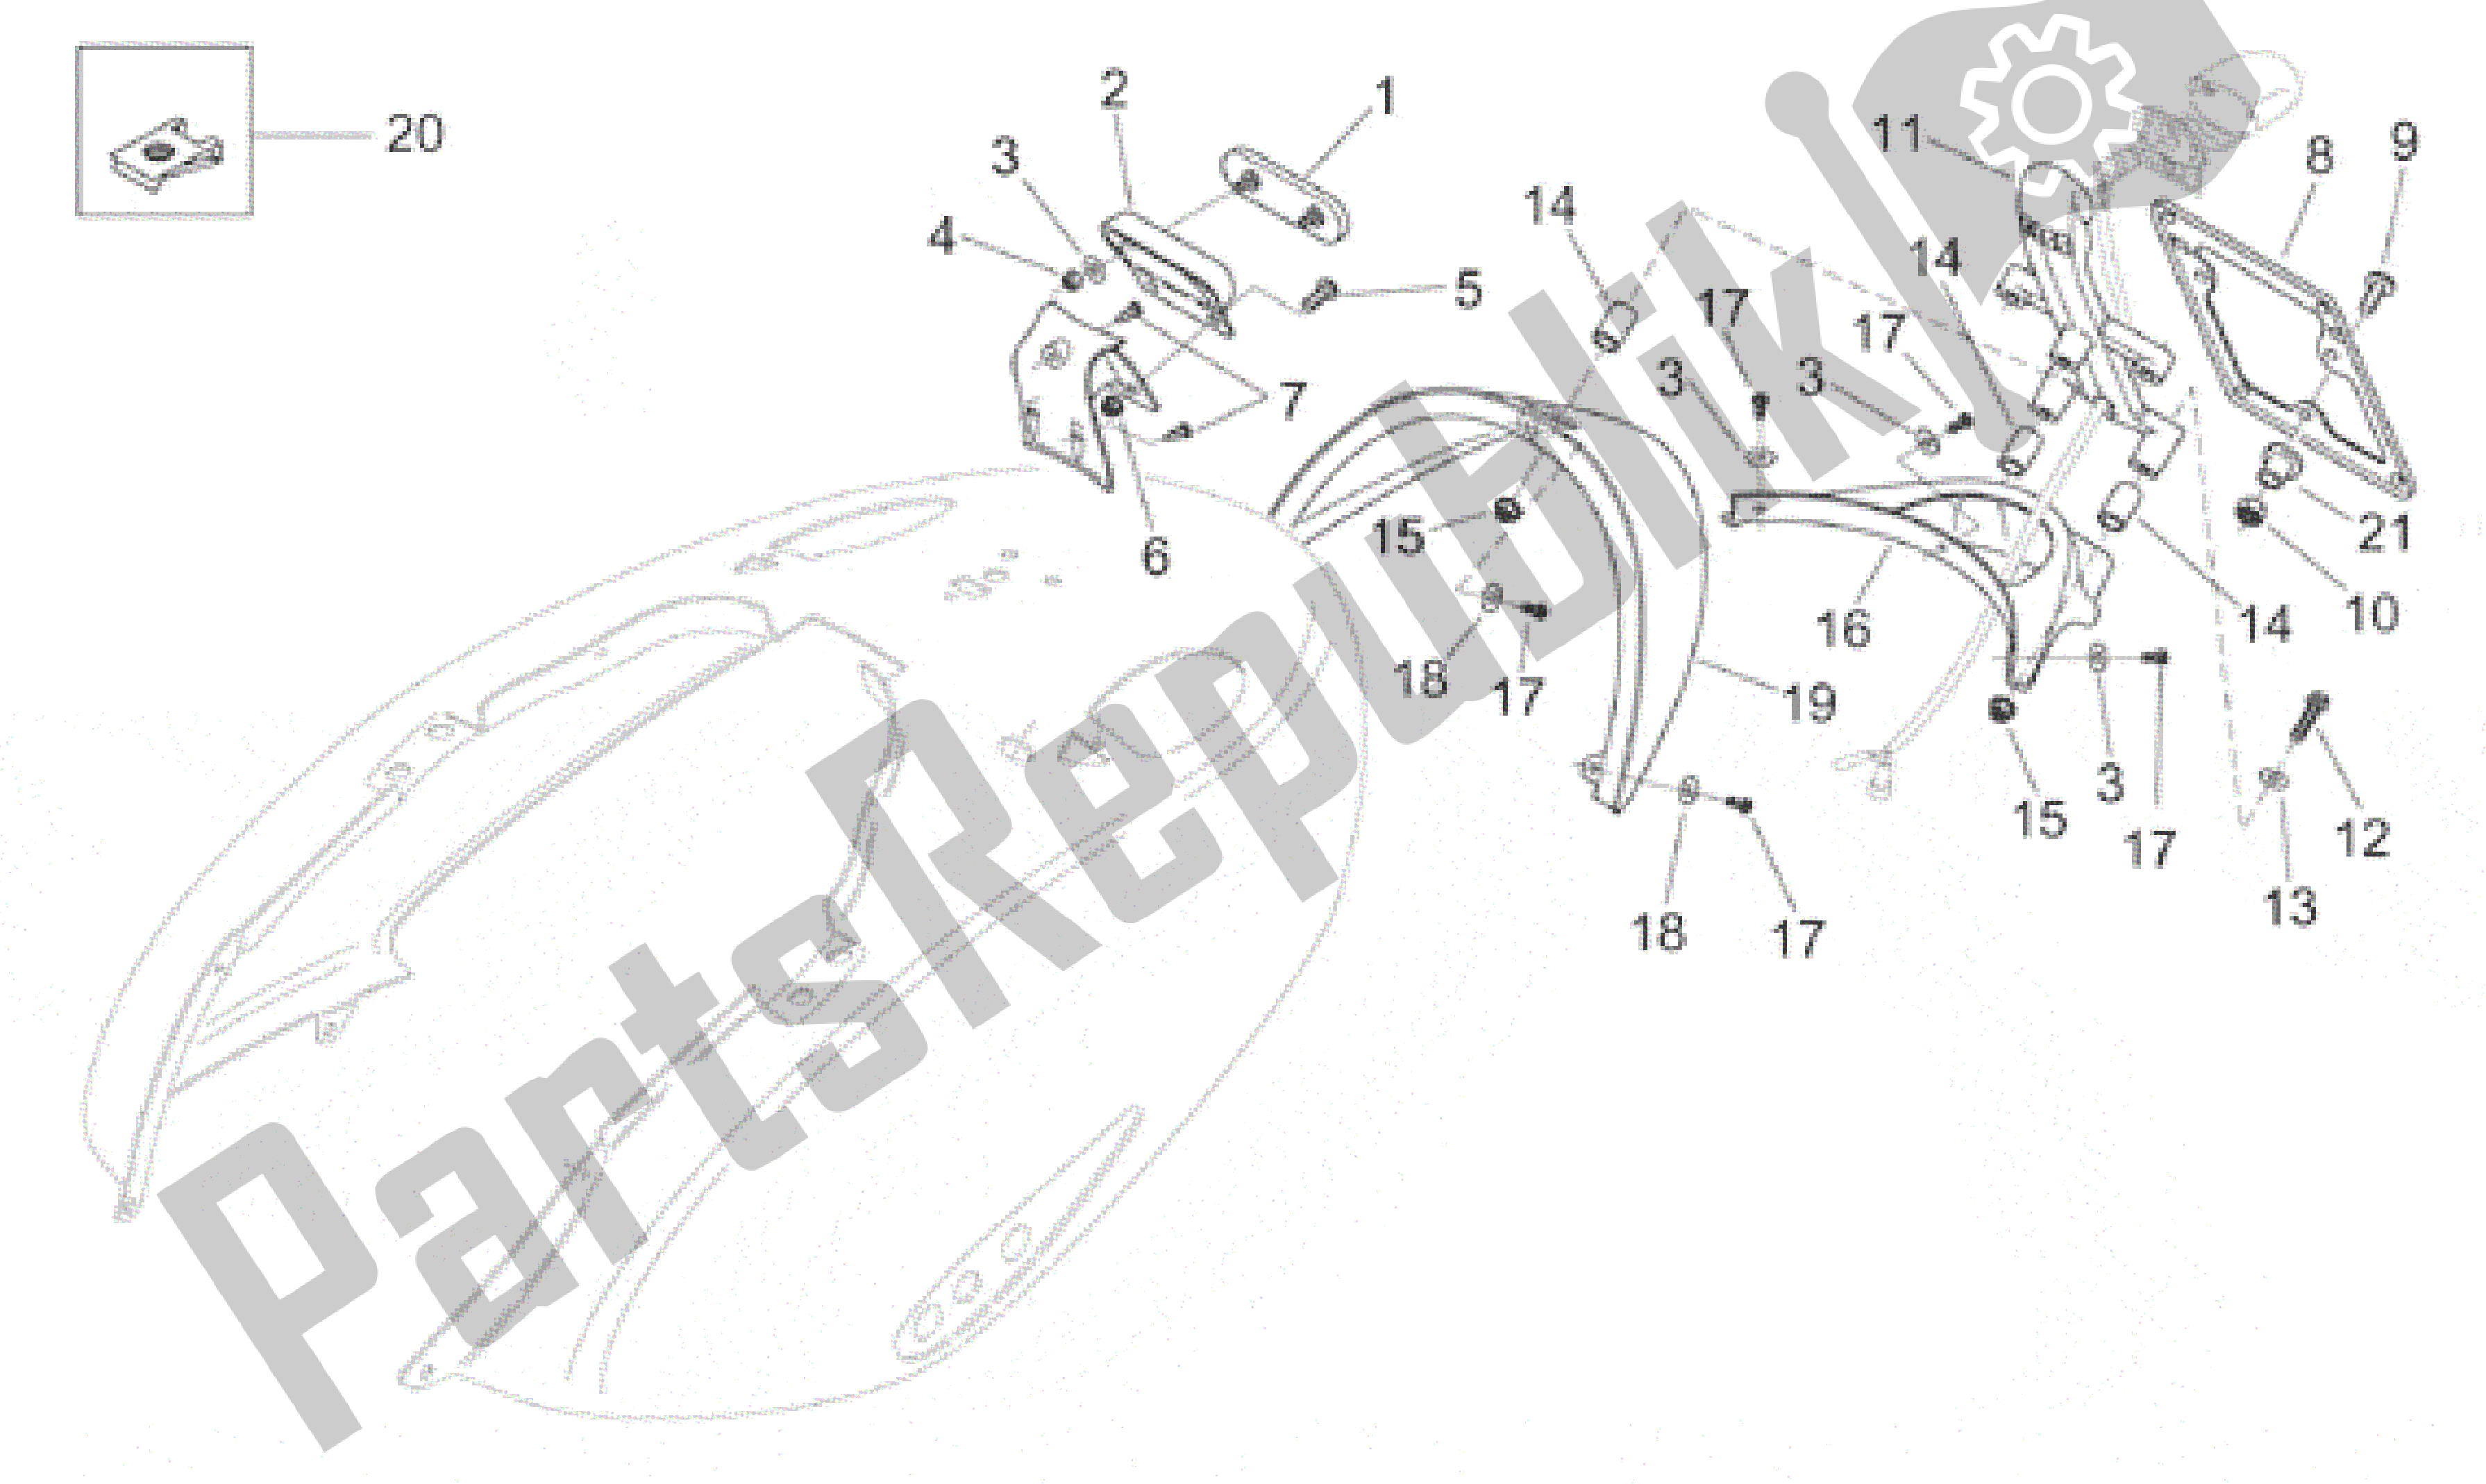 All parts for the Rear Body - Plate Holder of the Aprilia Habana 125 1999 - 2001